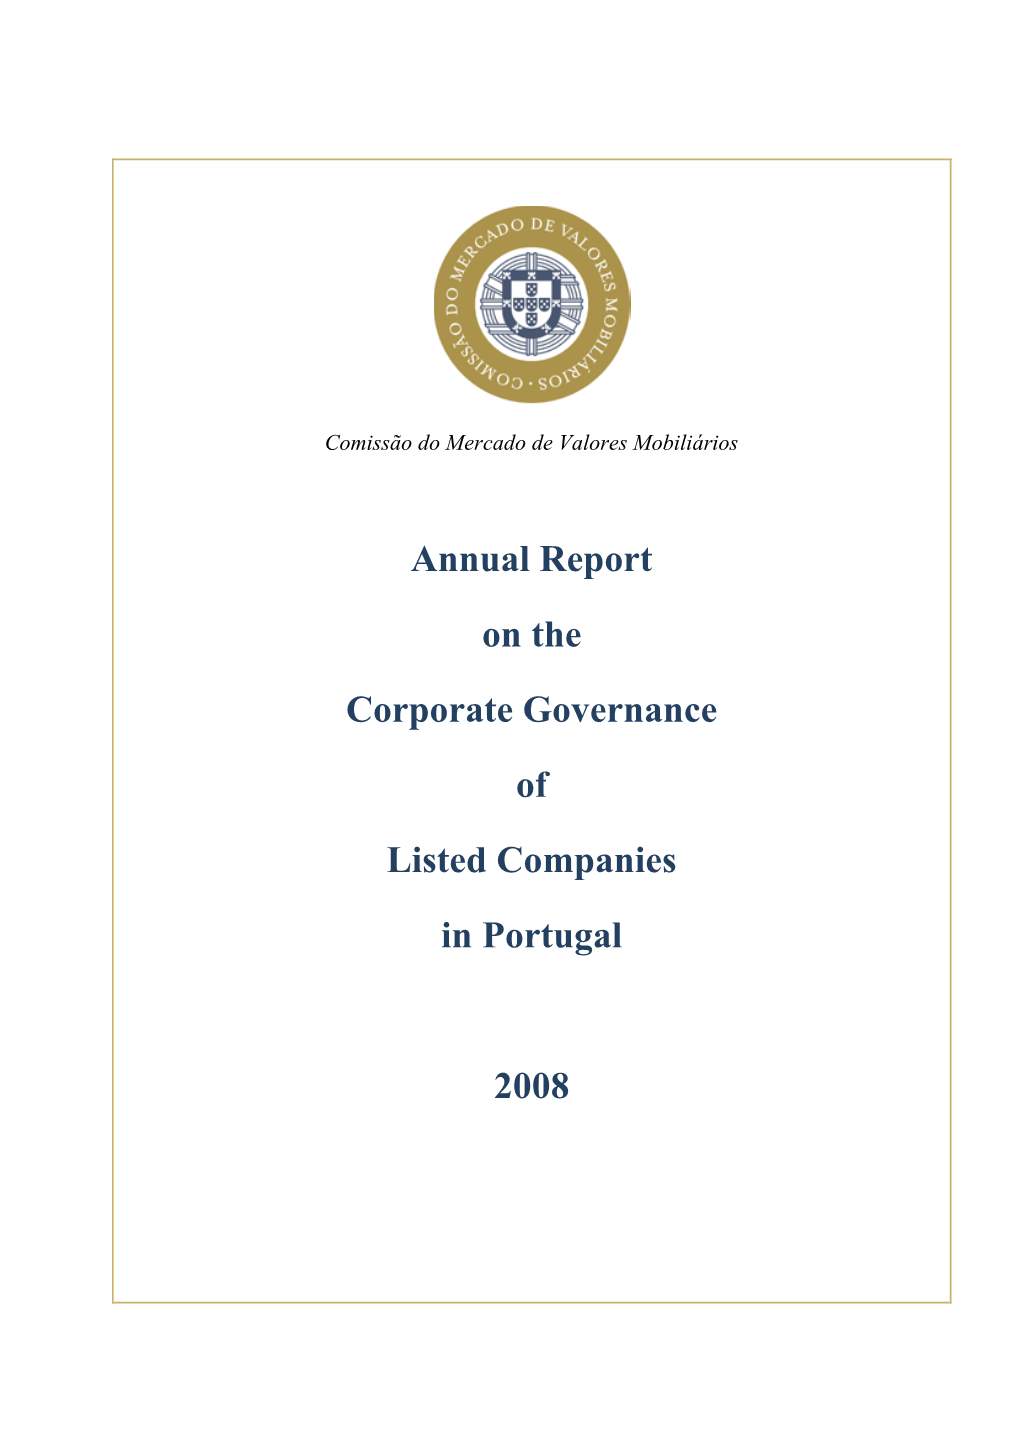 Annual Report on the Corporate Governance of Listed Companies in Portugal 2008